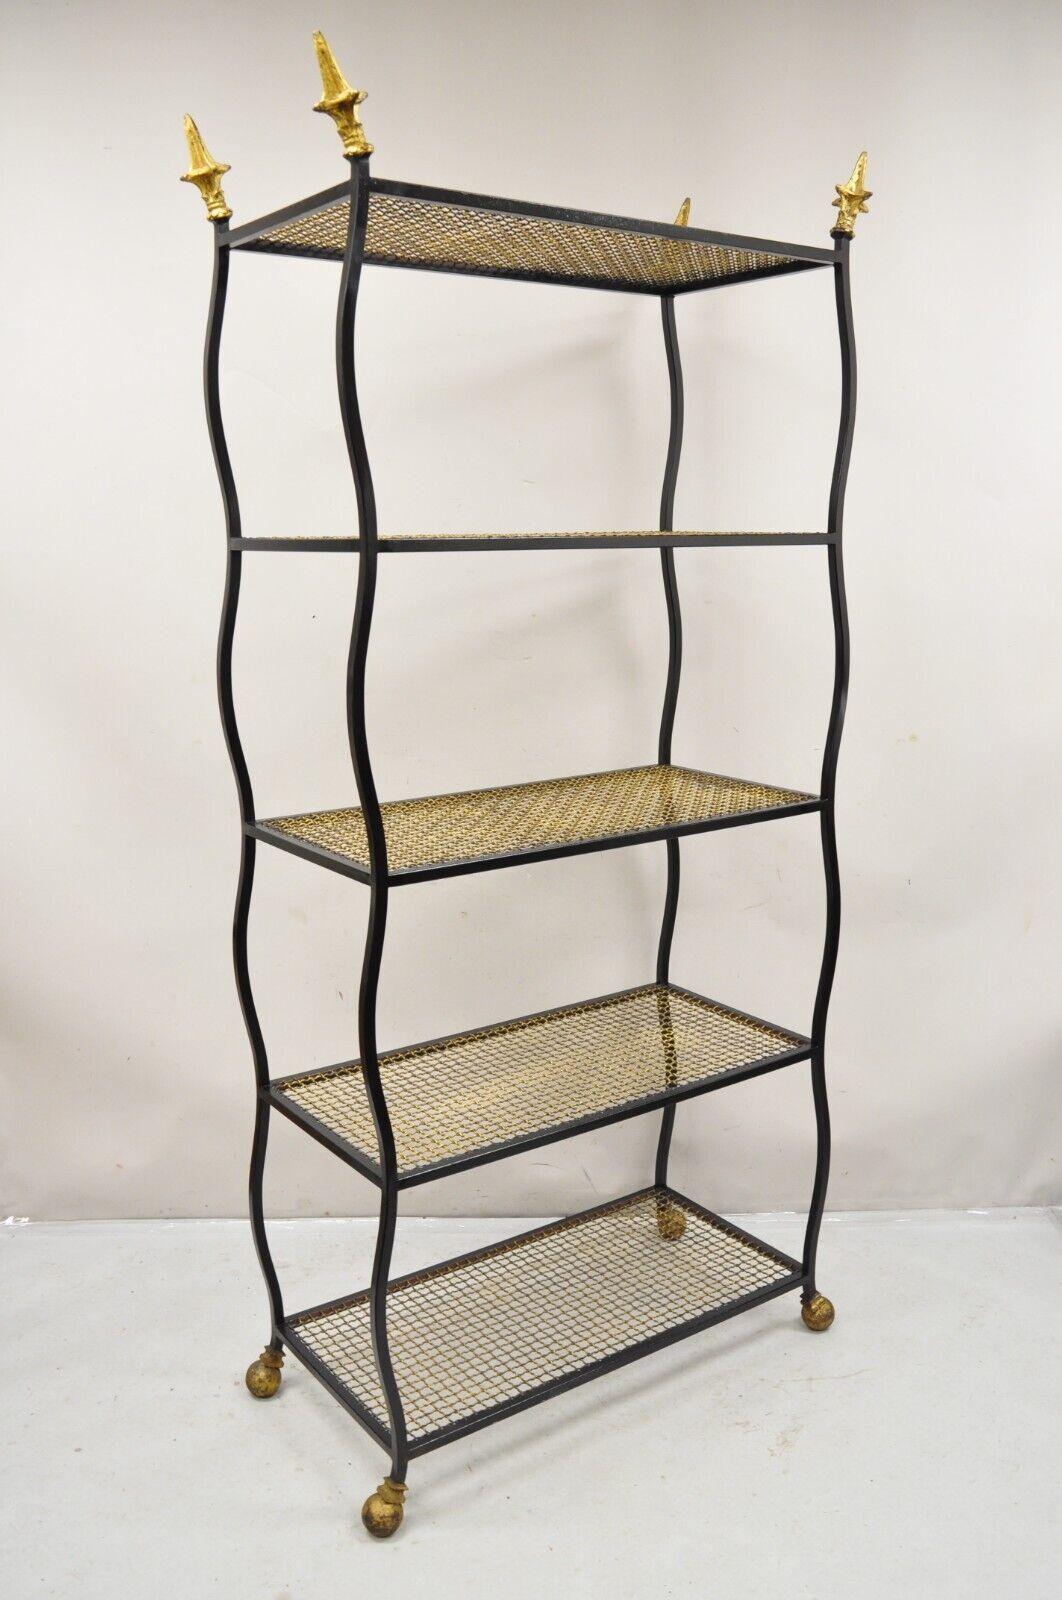 Vintage Italian Hollywood Regency Wrought  Iron Black and Gold Bookshelf Etagere. Item features pointed gold finials, black iron frame, gold iron metal mesh shelves, ball form feet, distressed finish, sleek sculptural form. Circa Mid to Late 20th